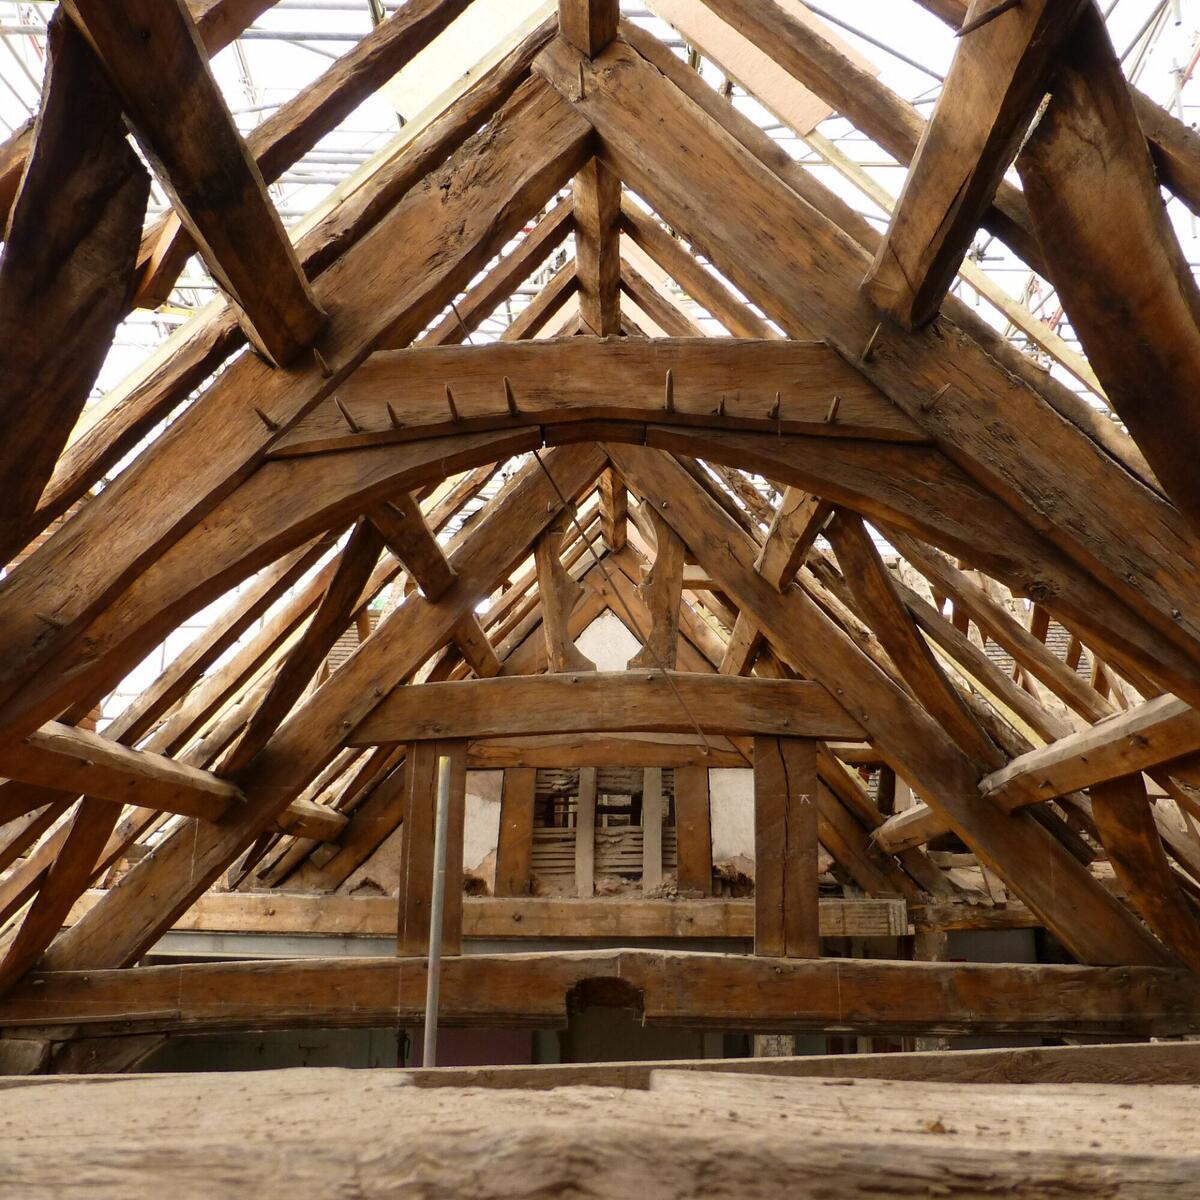 Exposed roof timbers